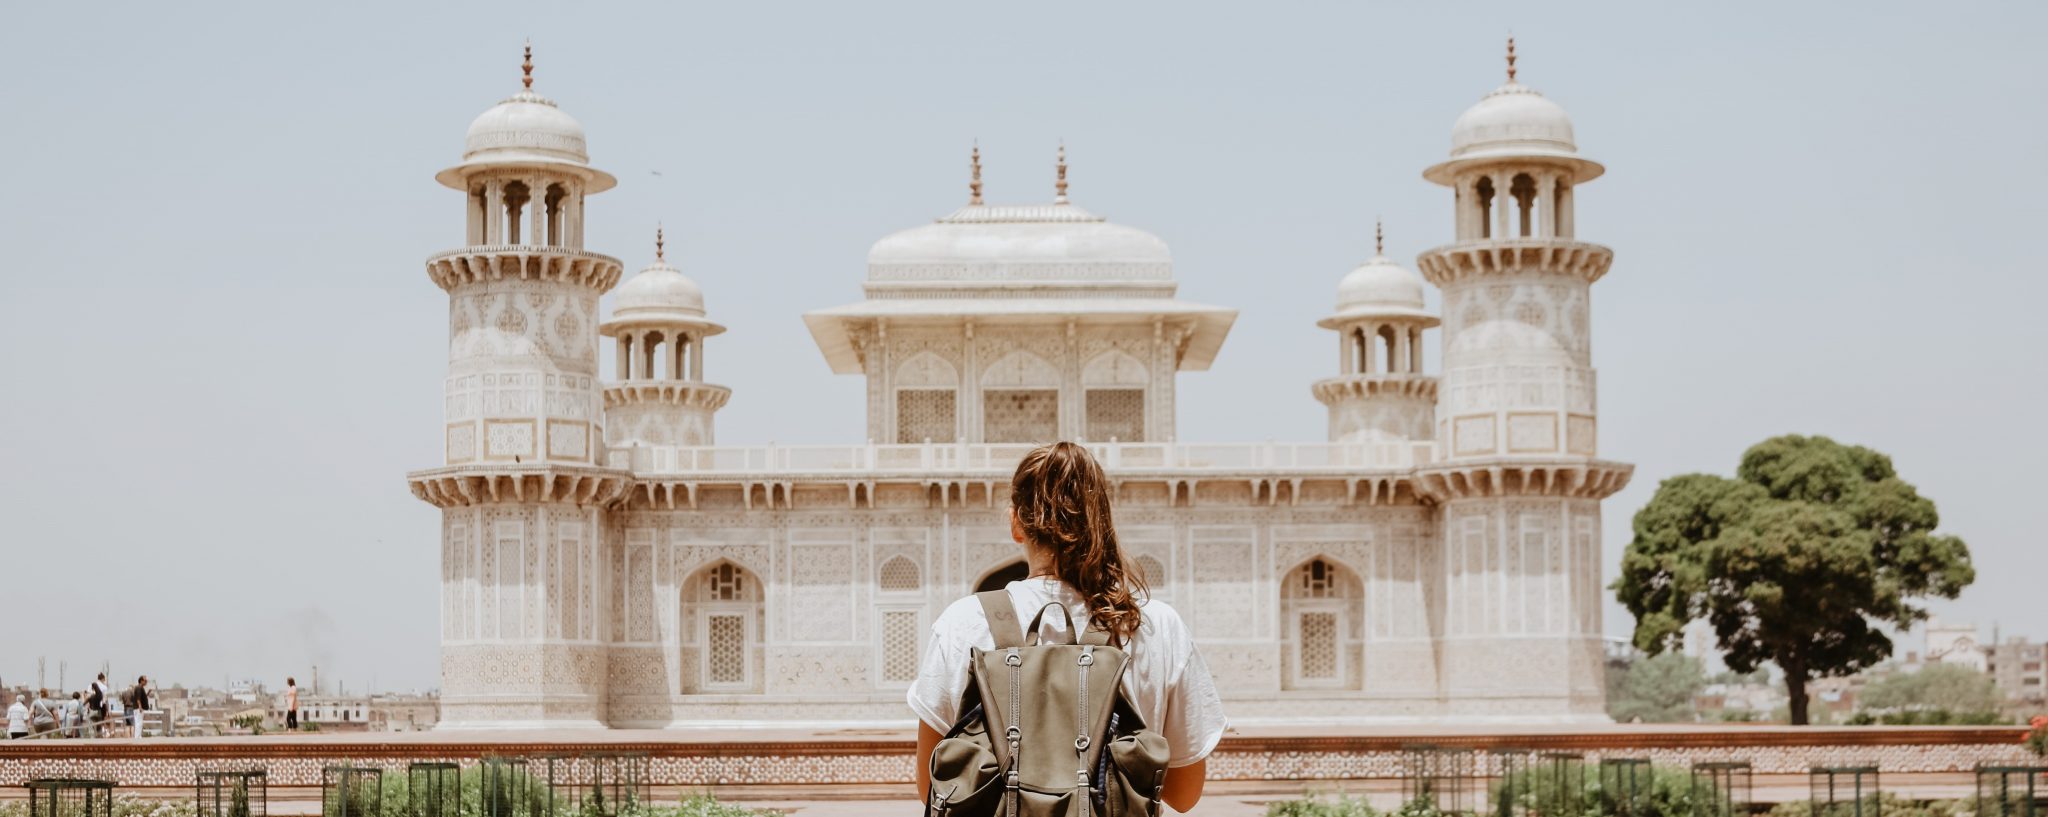 6 Tips for Solo Female Travel in India